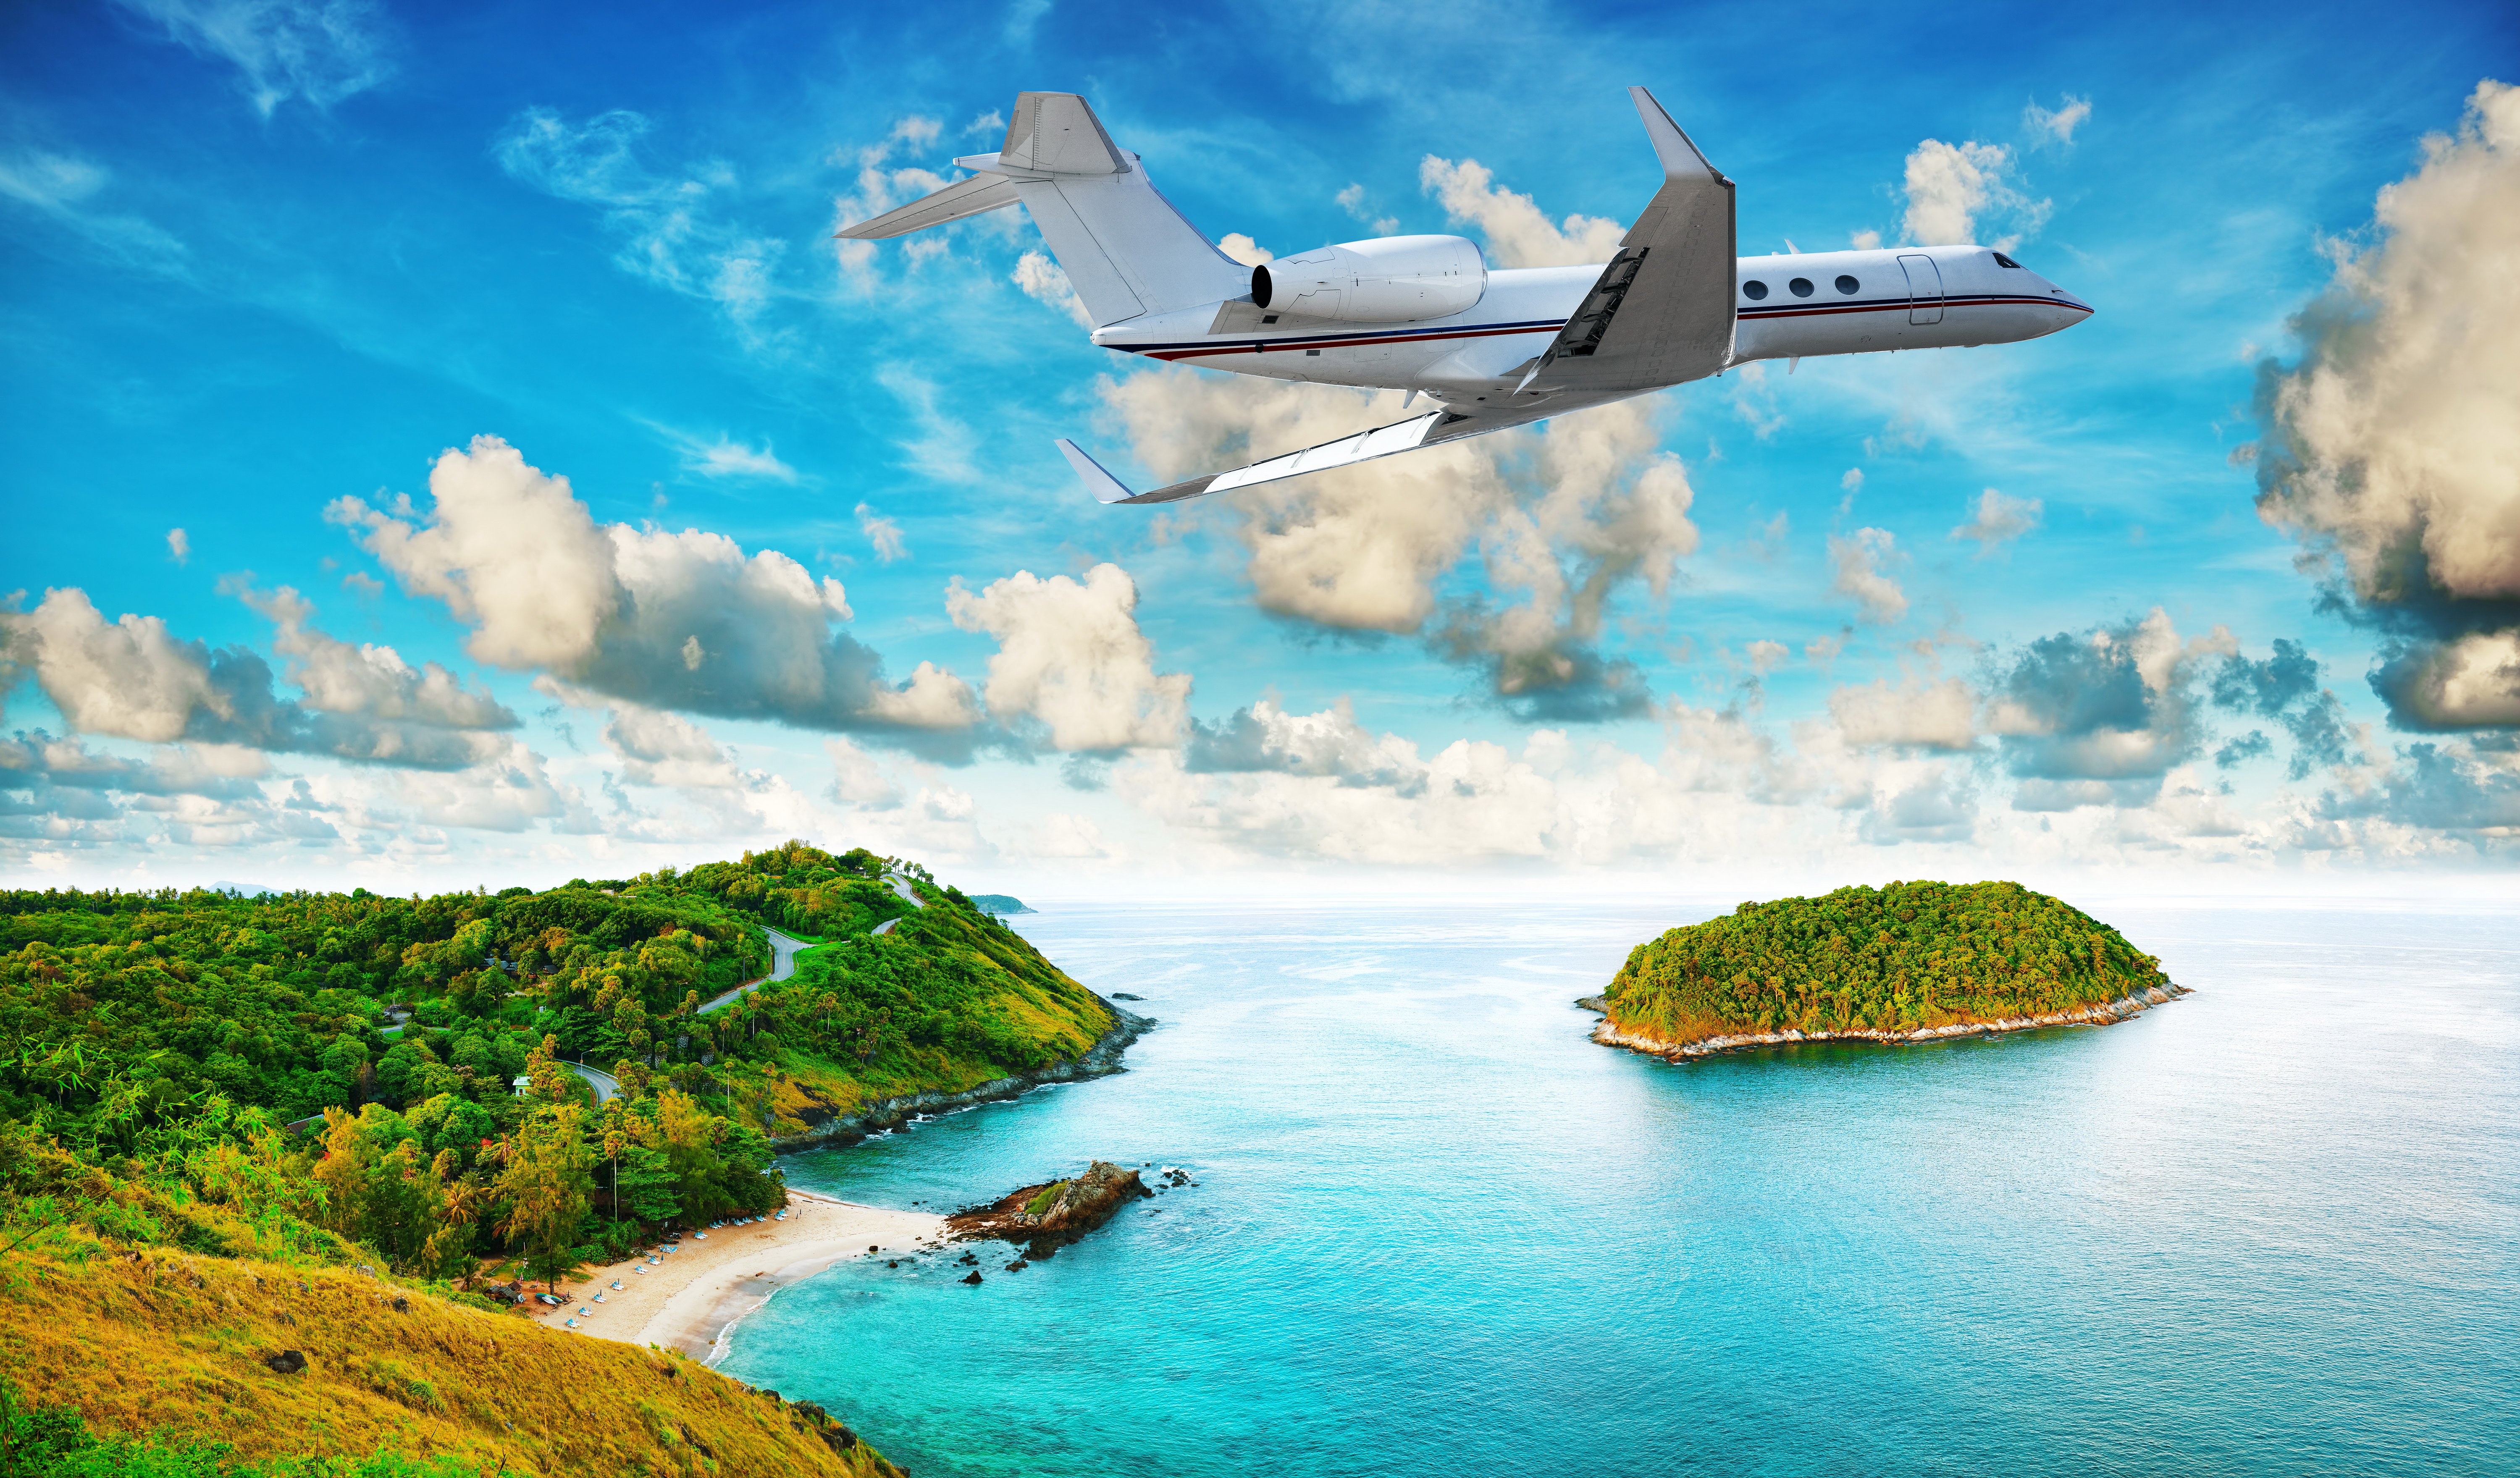 tropics, French, Polynesia, Island, Sky, Airplane, Passenger, Airplanes, Clouds, Nature, Jet, Airliner Wallpaper